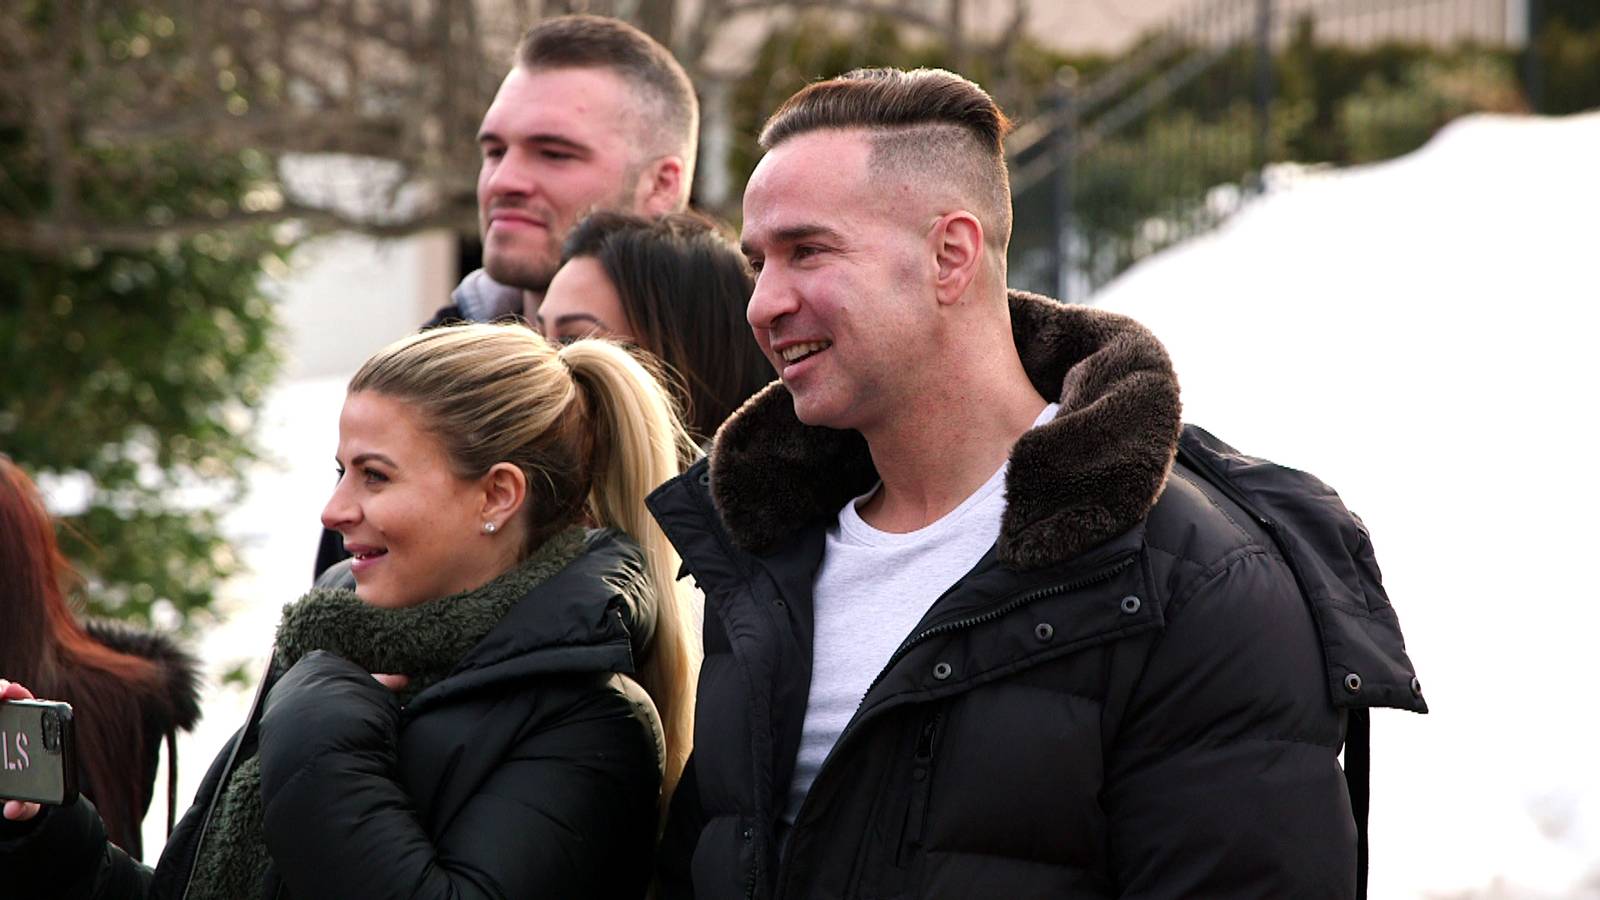 Lauren and Mike 'The Situation' Sorrentino smiling in an episode of 'Jersey Shore: Family Vacation' Season 4